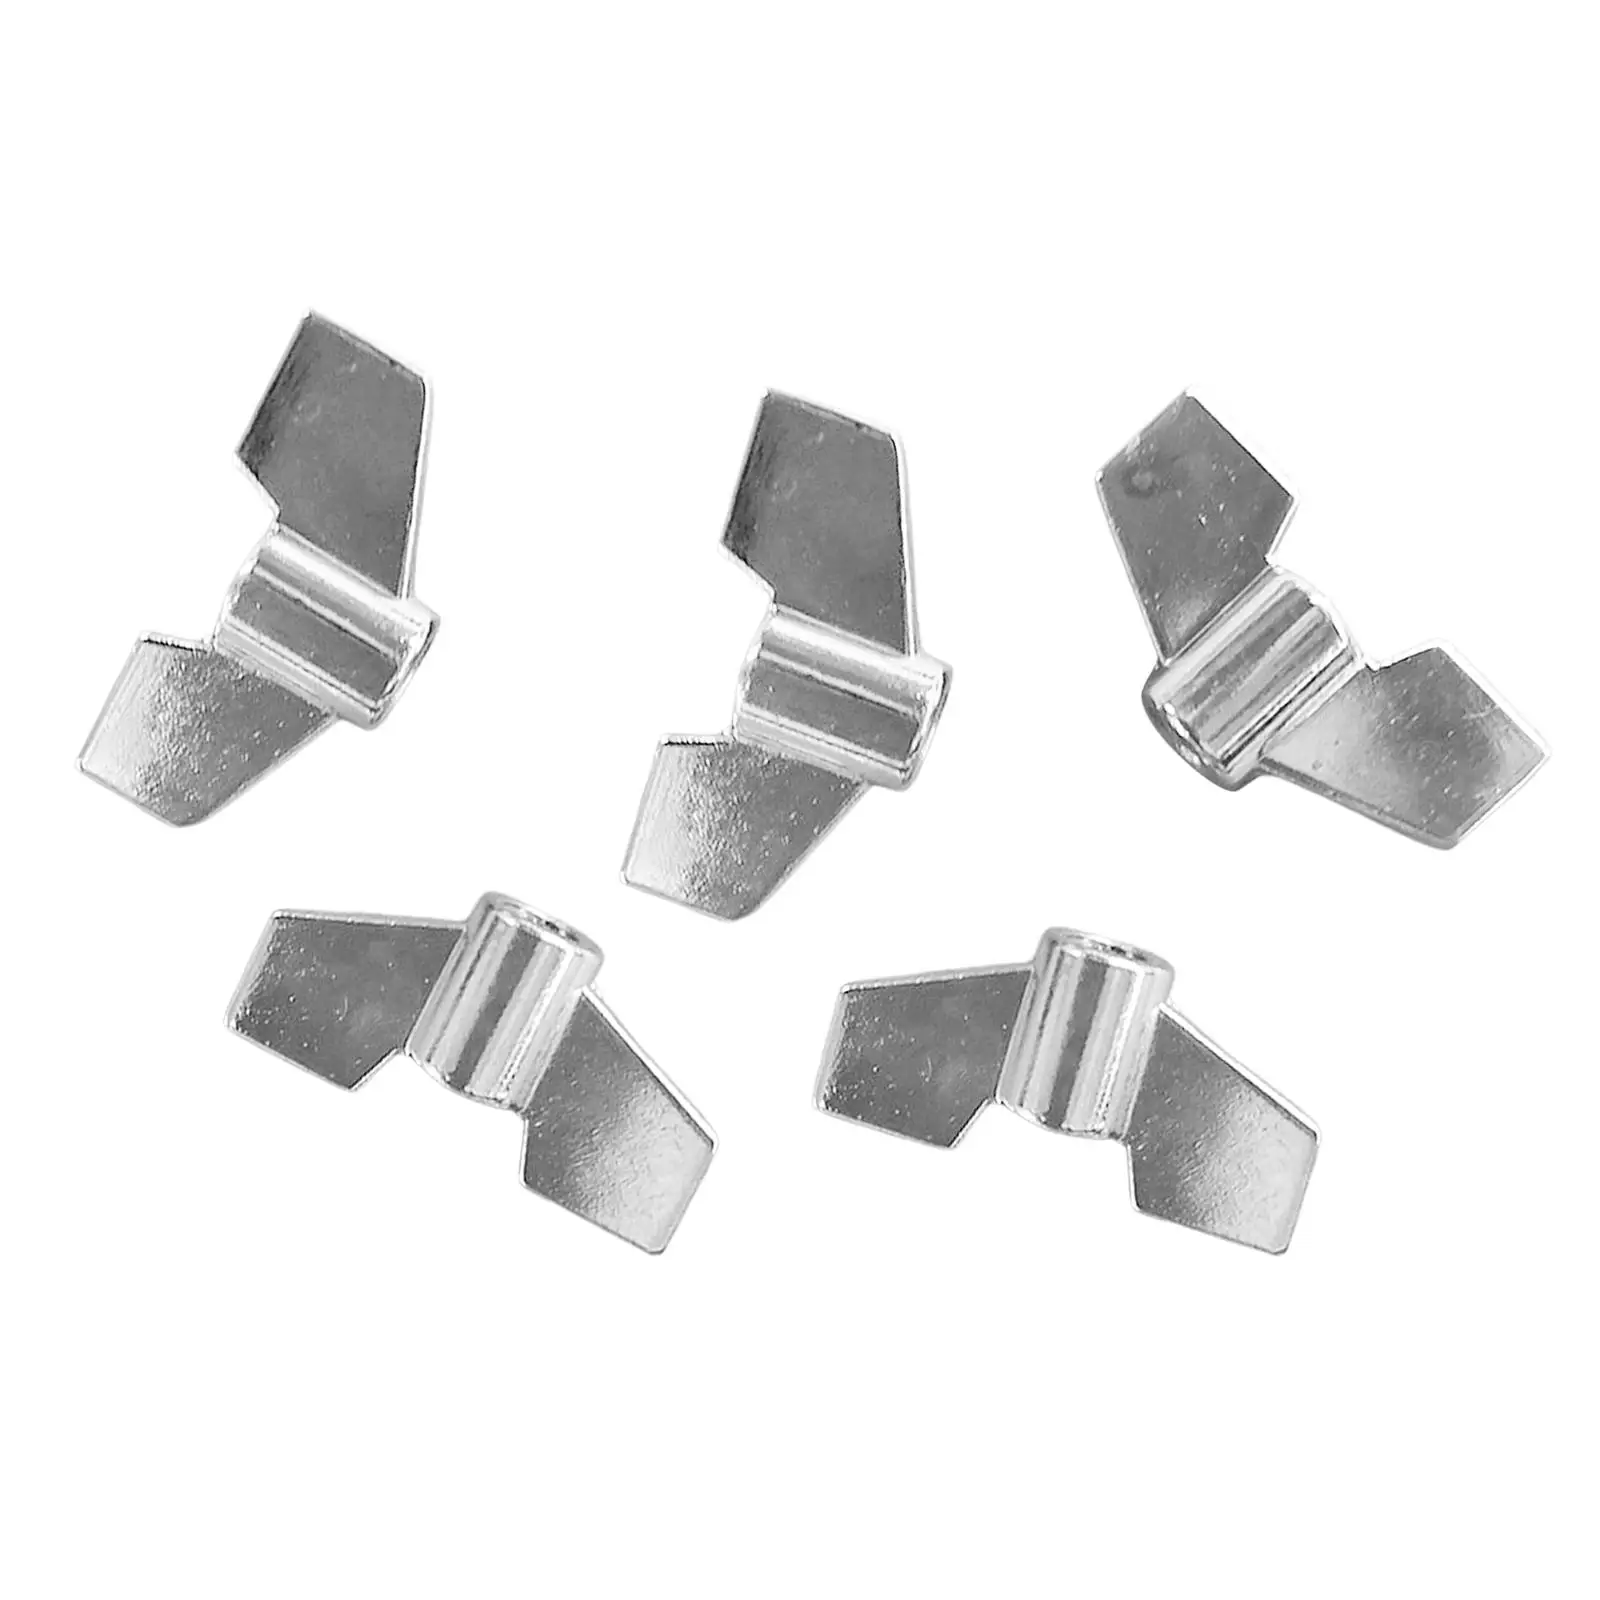 5x Drum Wing Nuts Musical Instrument Parts Heavy Duty Wing Nuts Drum Replacement Parts Wing Nuts for Cymbal Stackers